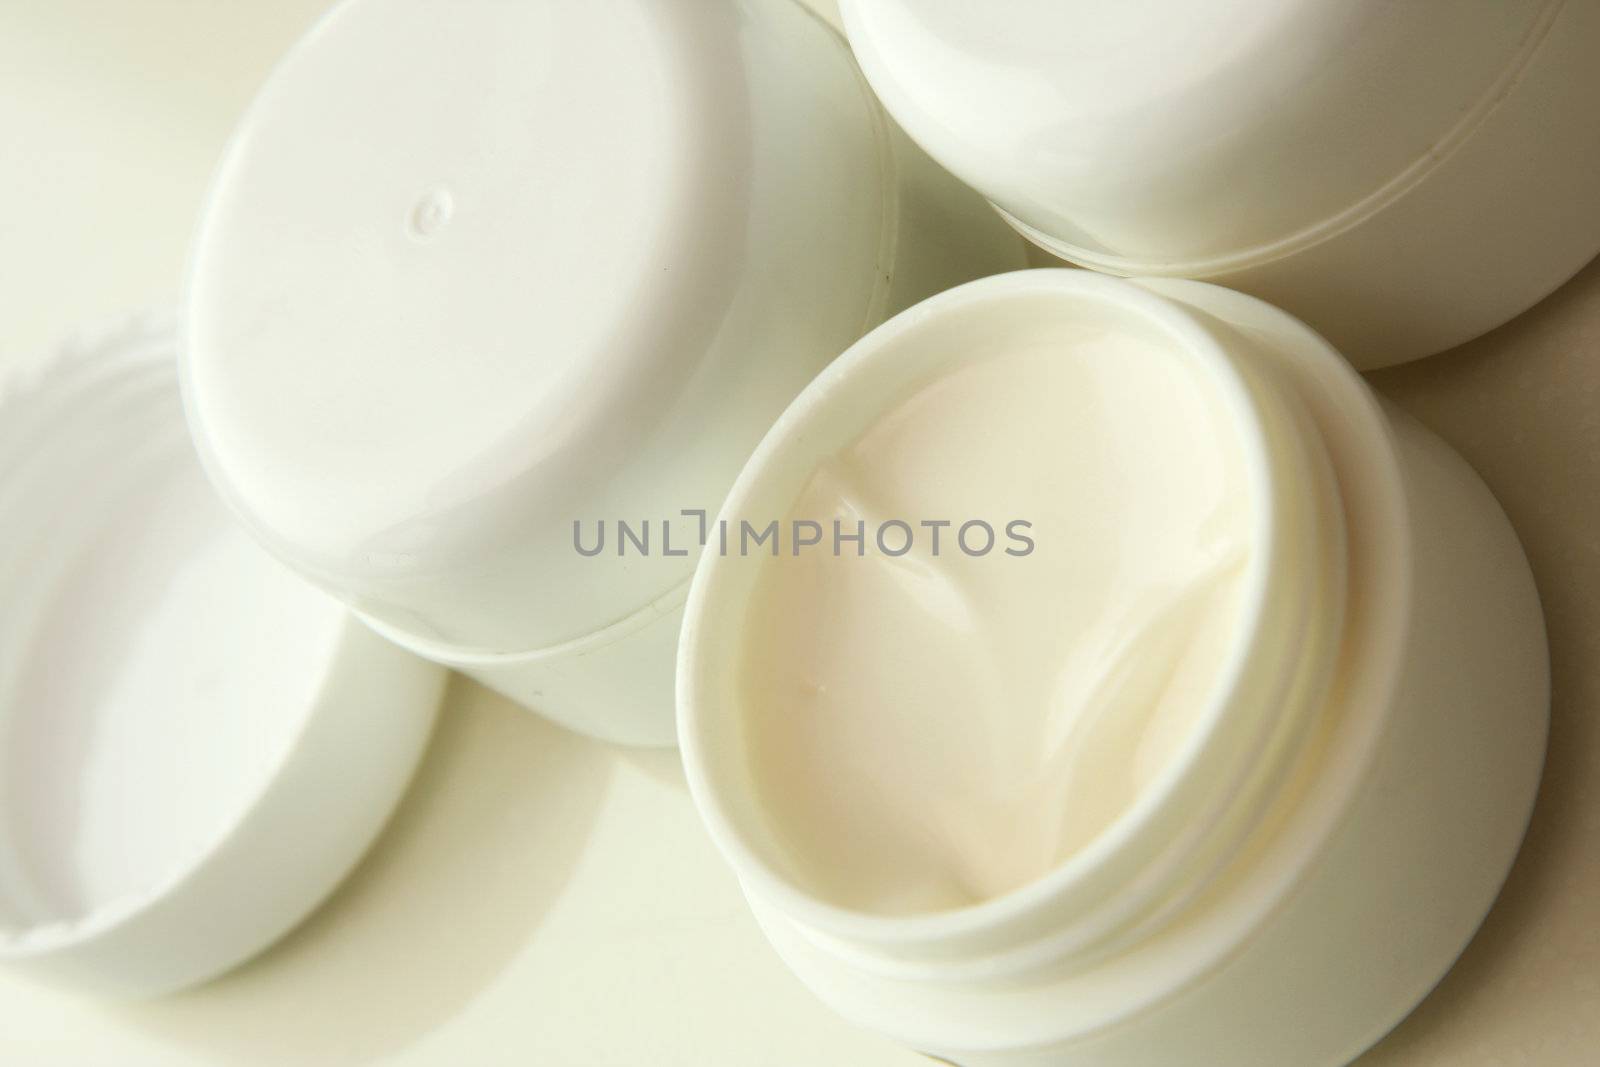 Jars of moisturizer cream concept for beauty products and cosmetics.
